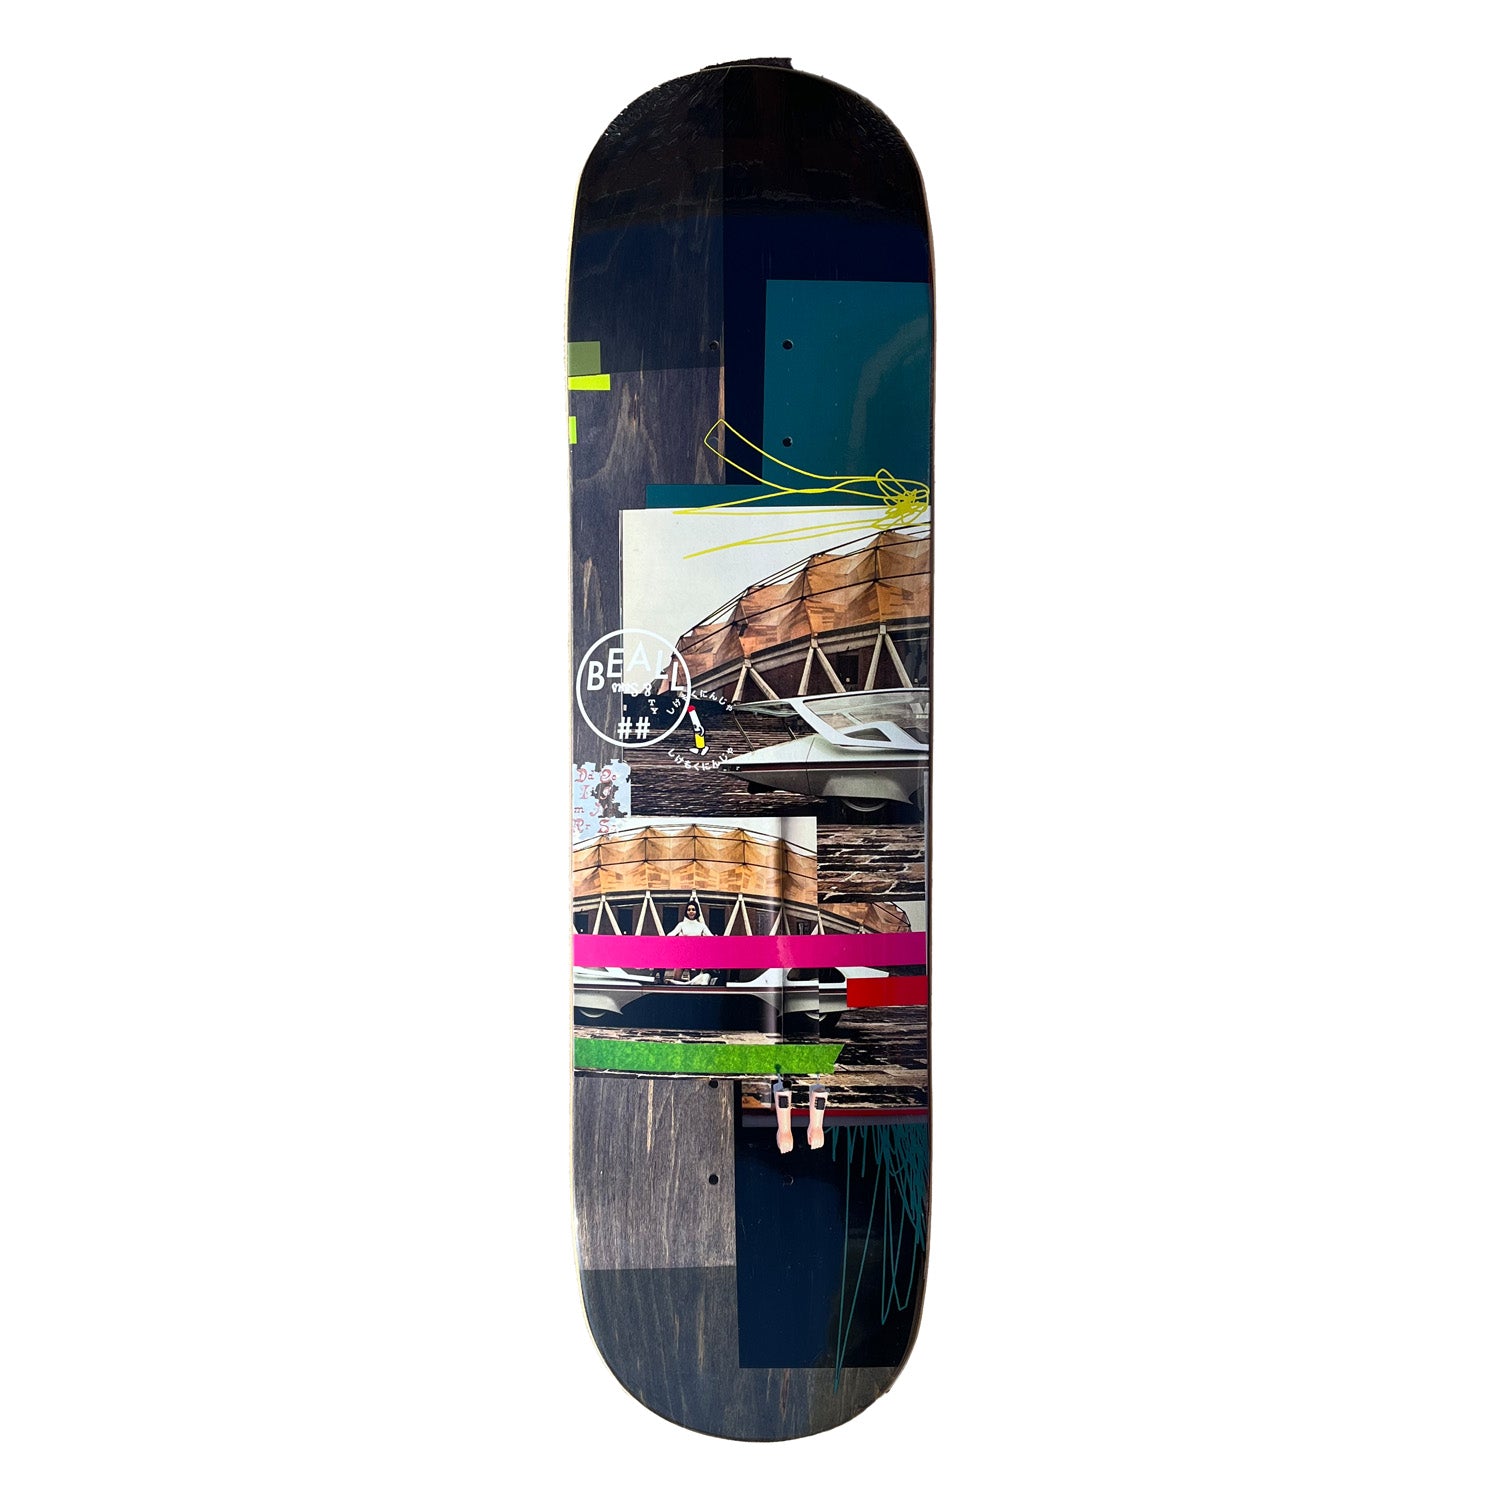 Scumco & Sons Ty Beall Supersonic Deck 8.125"